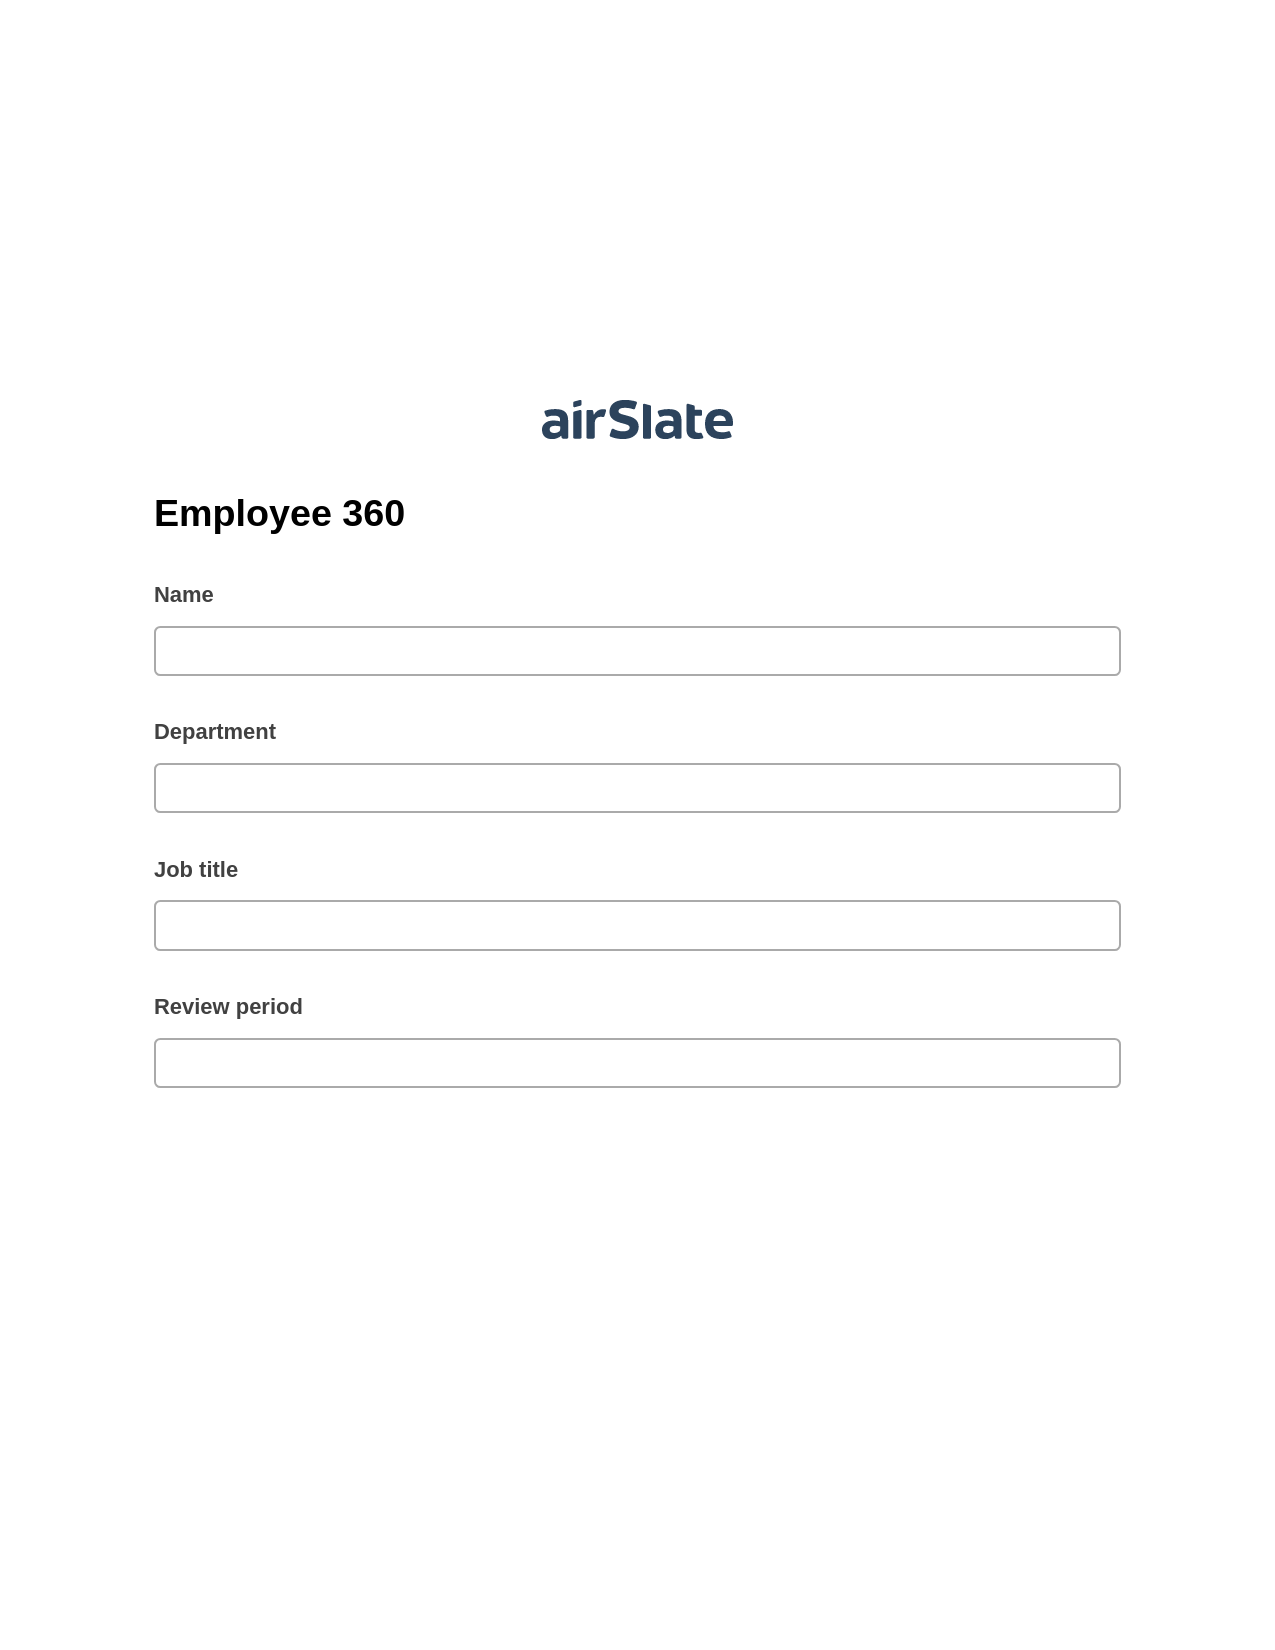 Employee 360 Pre-fill from Smartsheet Bot, Update MS Dynamics 365 Record Bot, Export to Google Sheet Bot